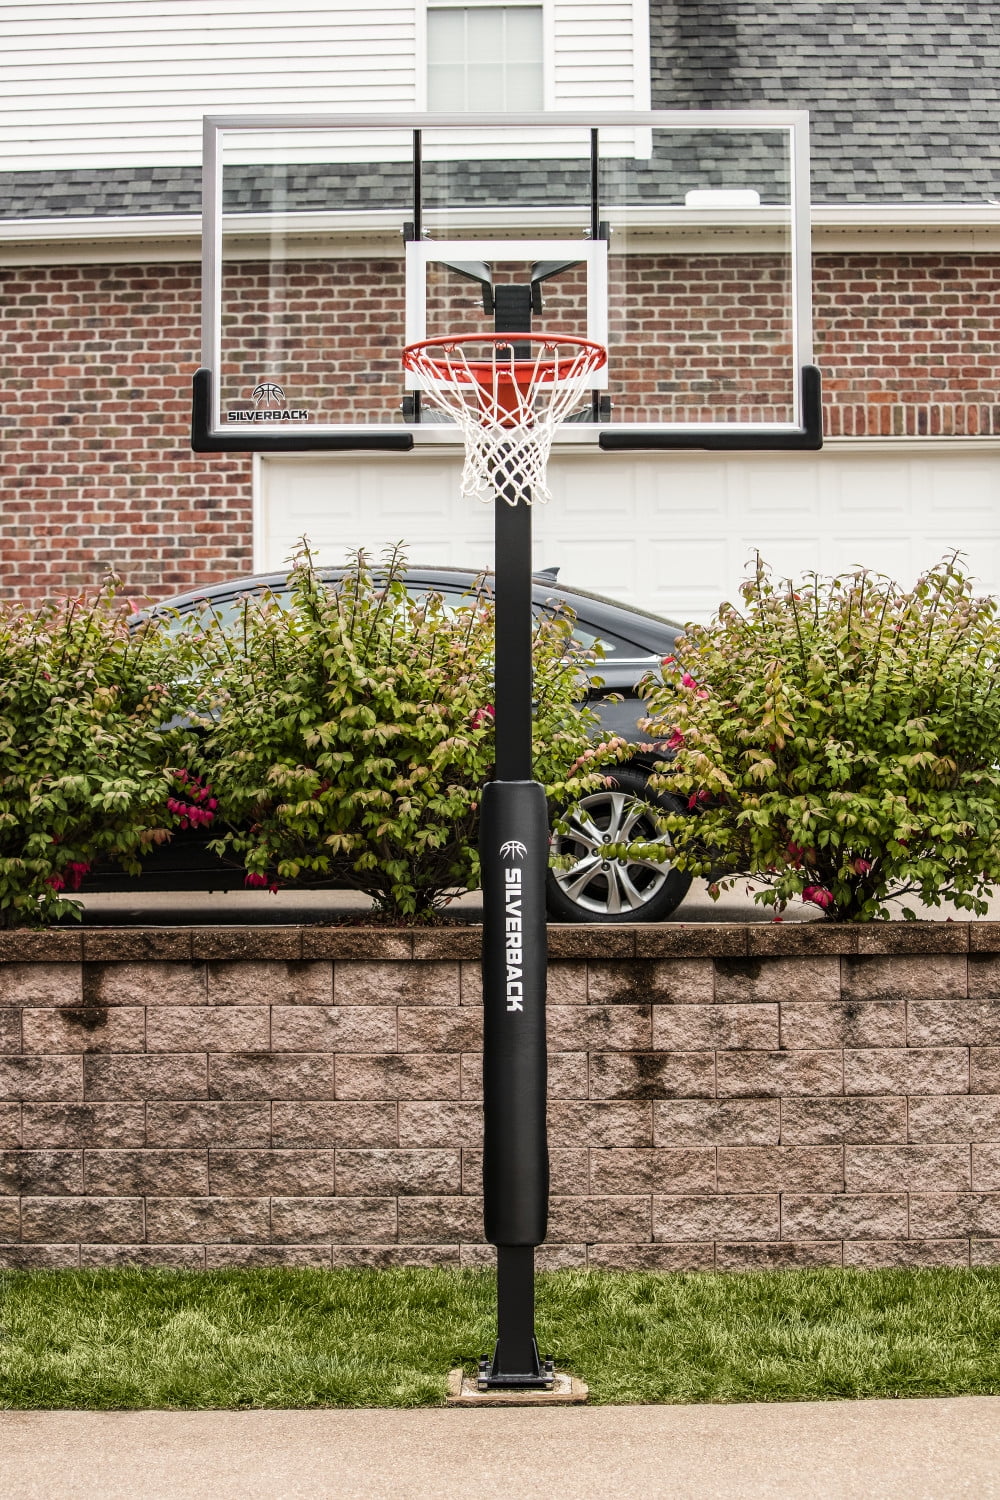 Silverback Basketball Yard Guard Defensive Net System Rebounder With Foldable for sale online 